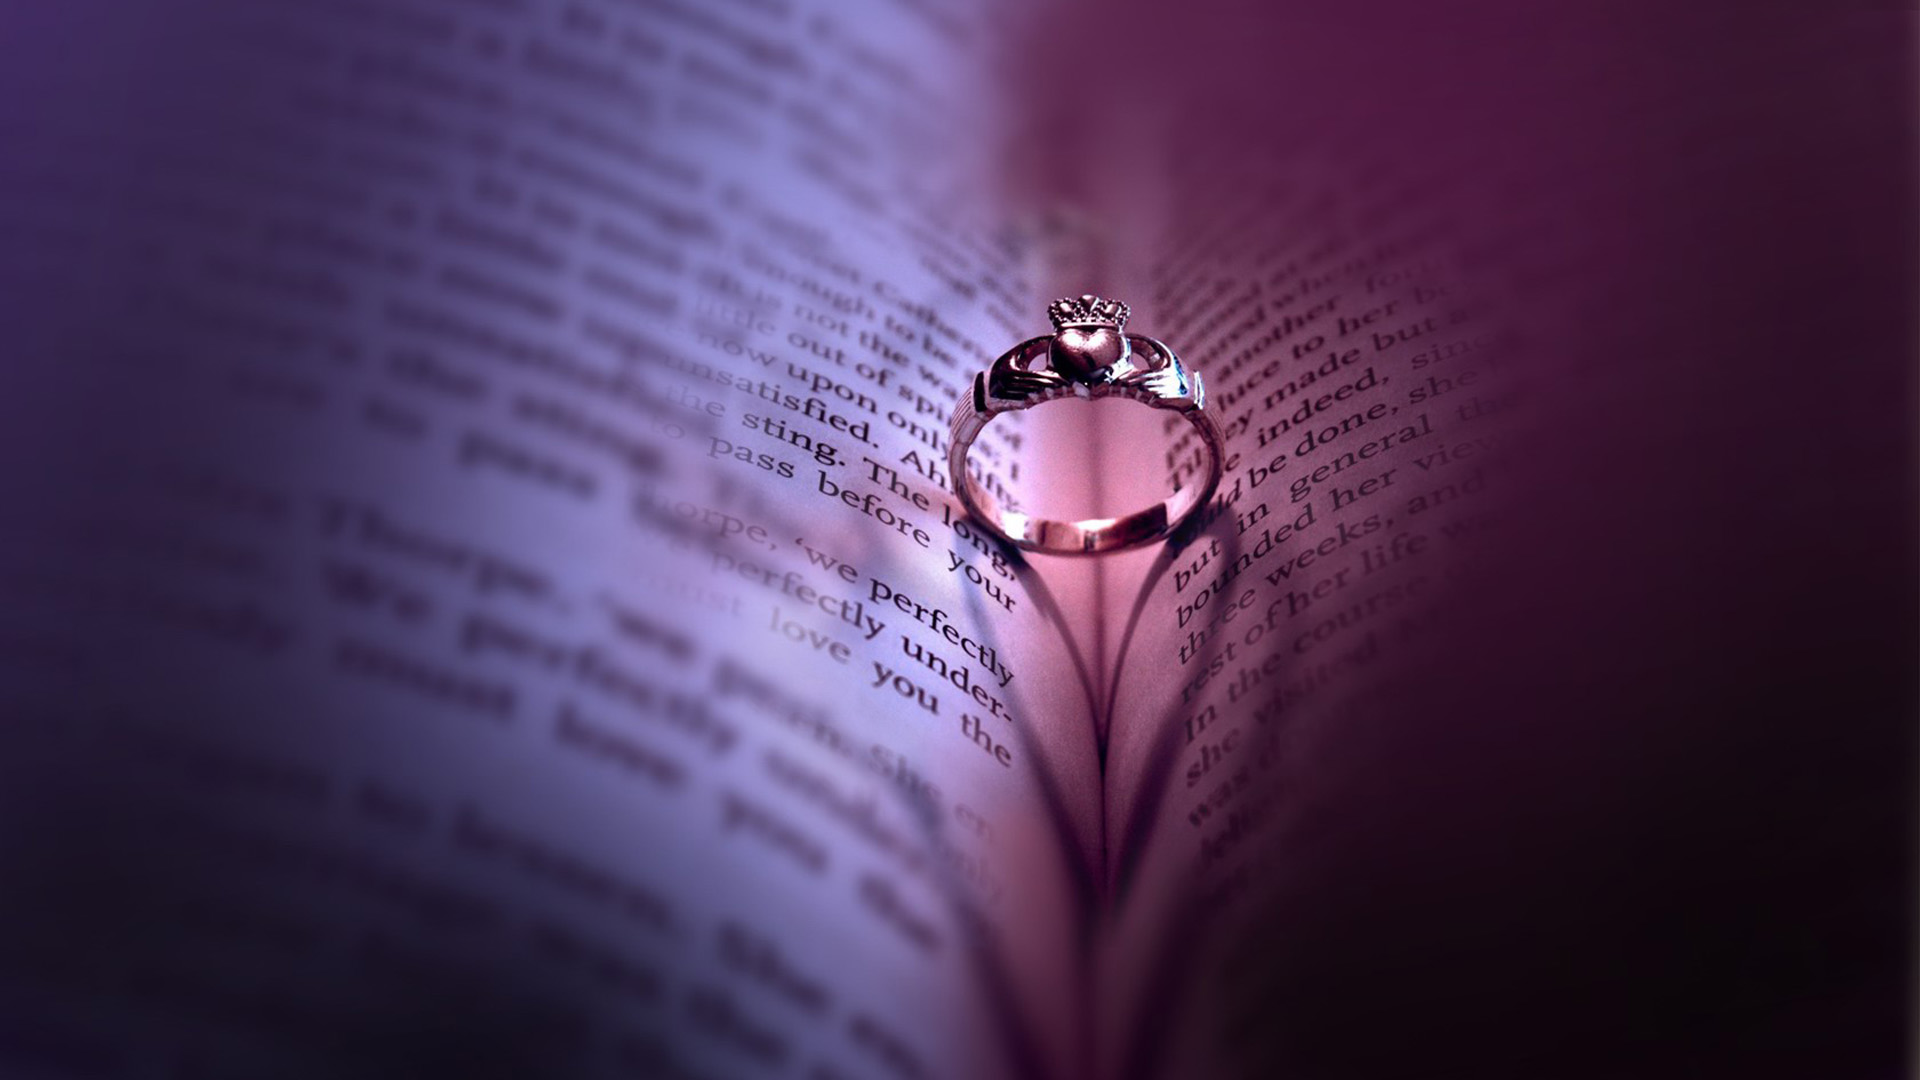 Love Your Life Ring and Book Desktop Wallpaper